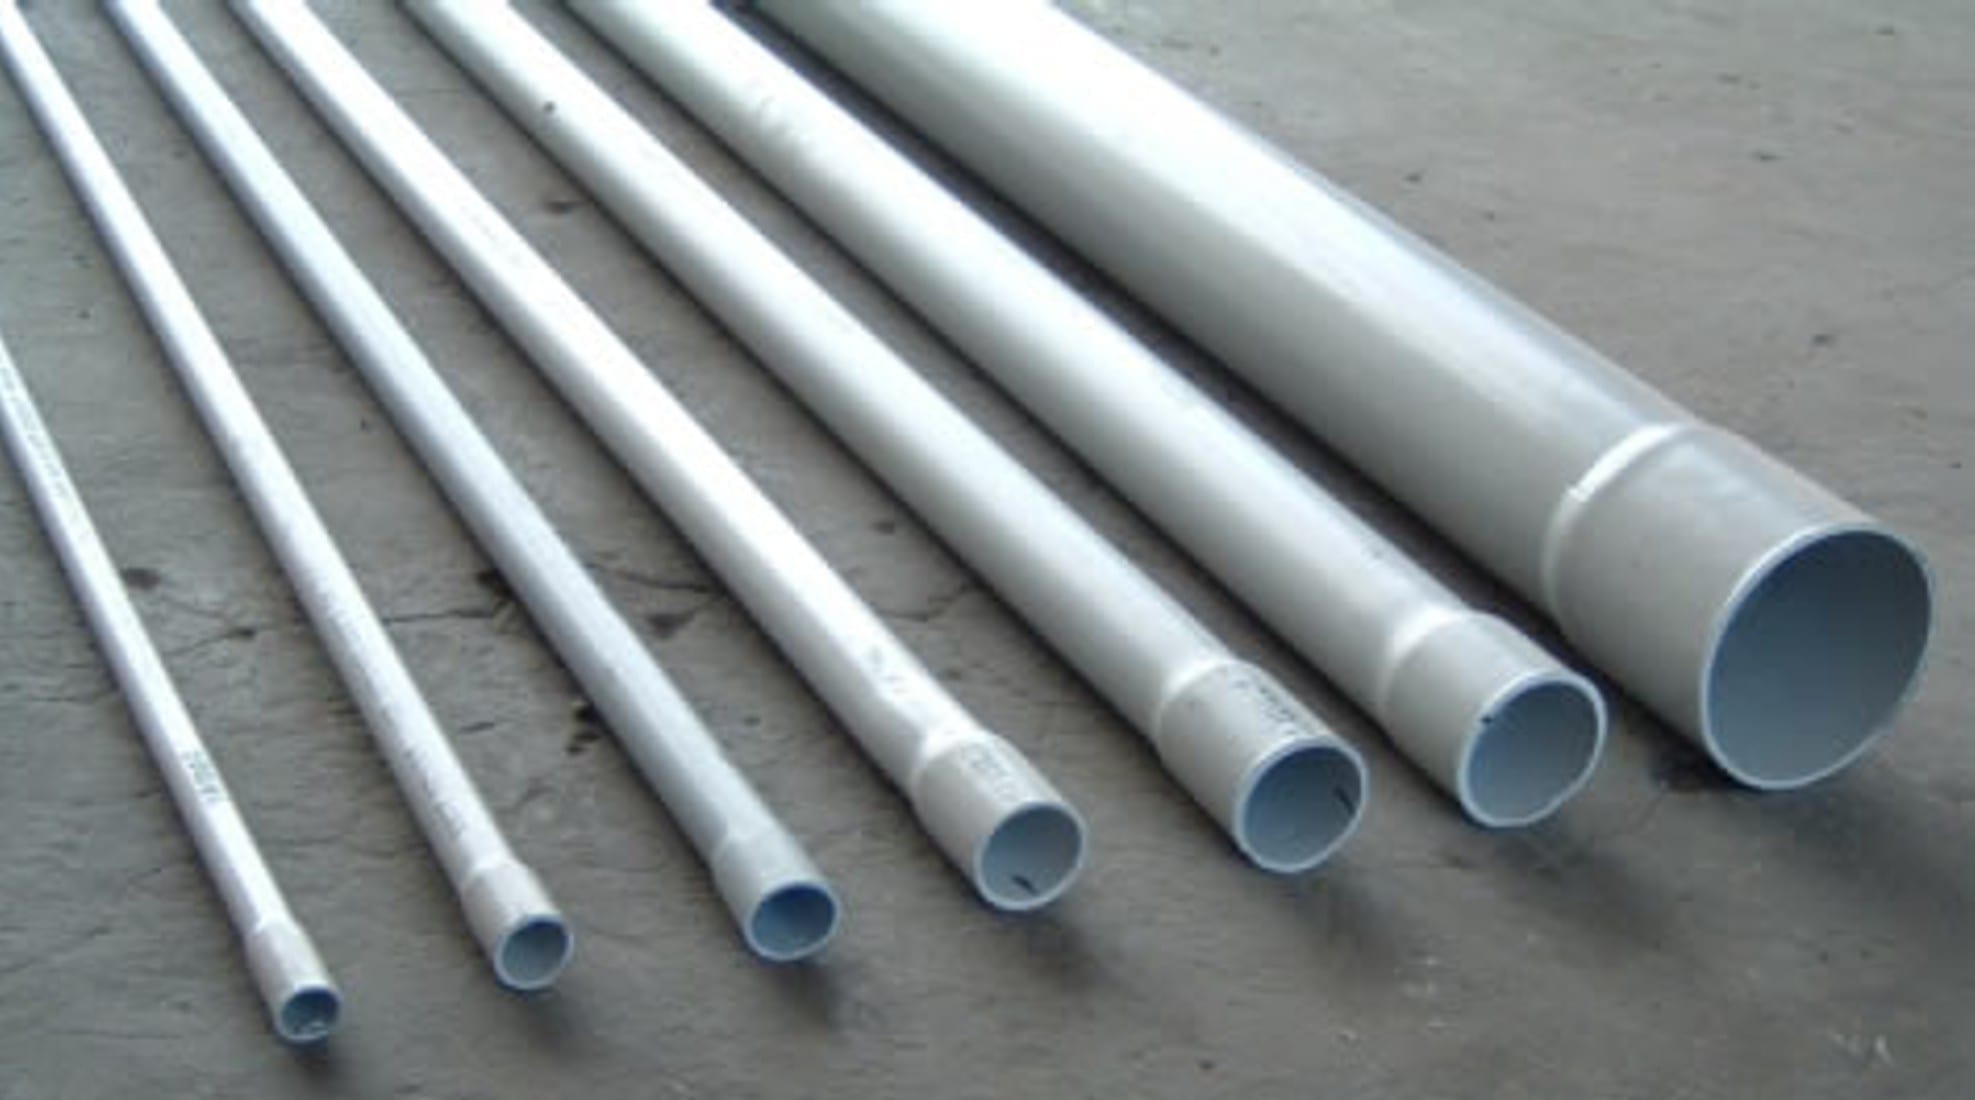  PVC Piping  is a Disaster Waiting to Happen for Compressed 